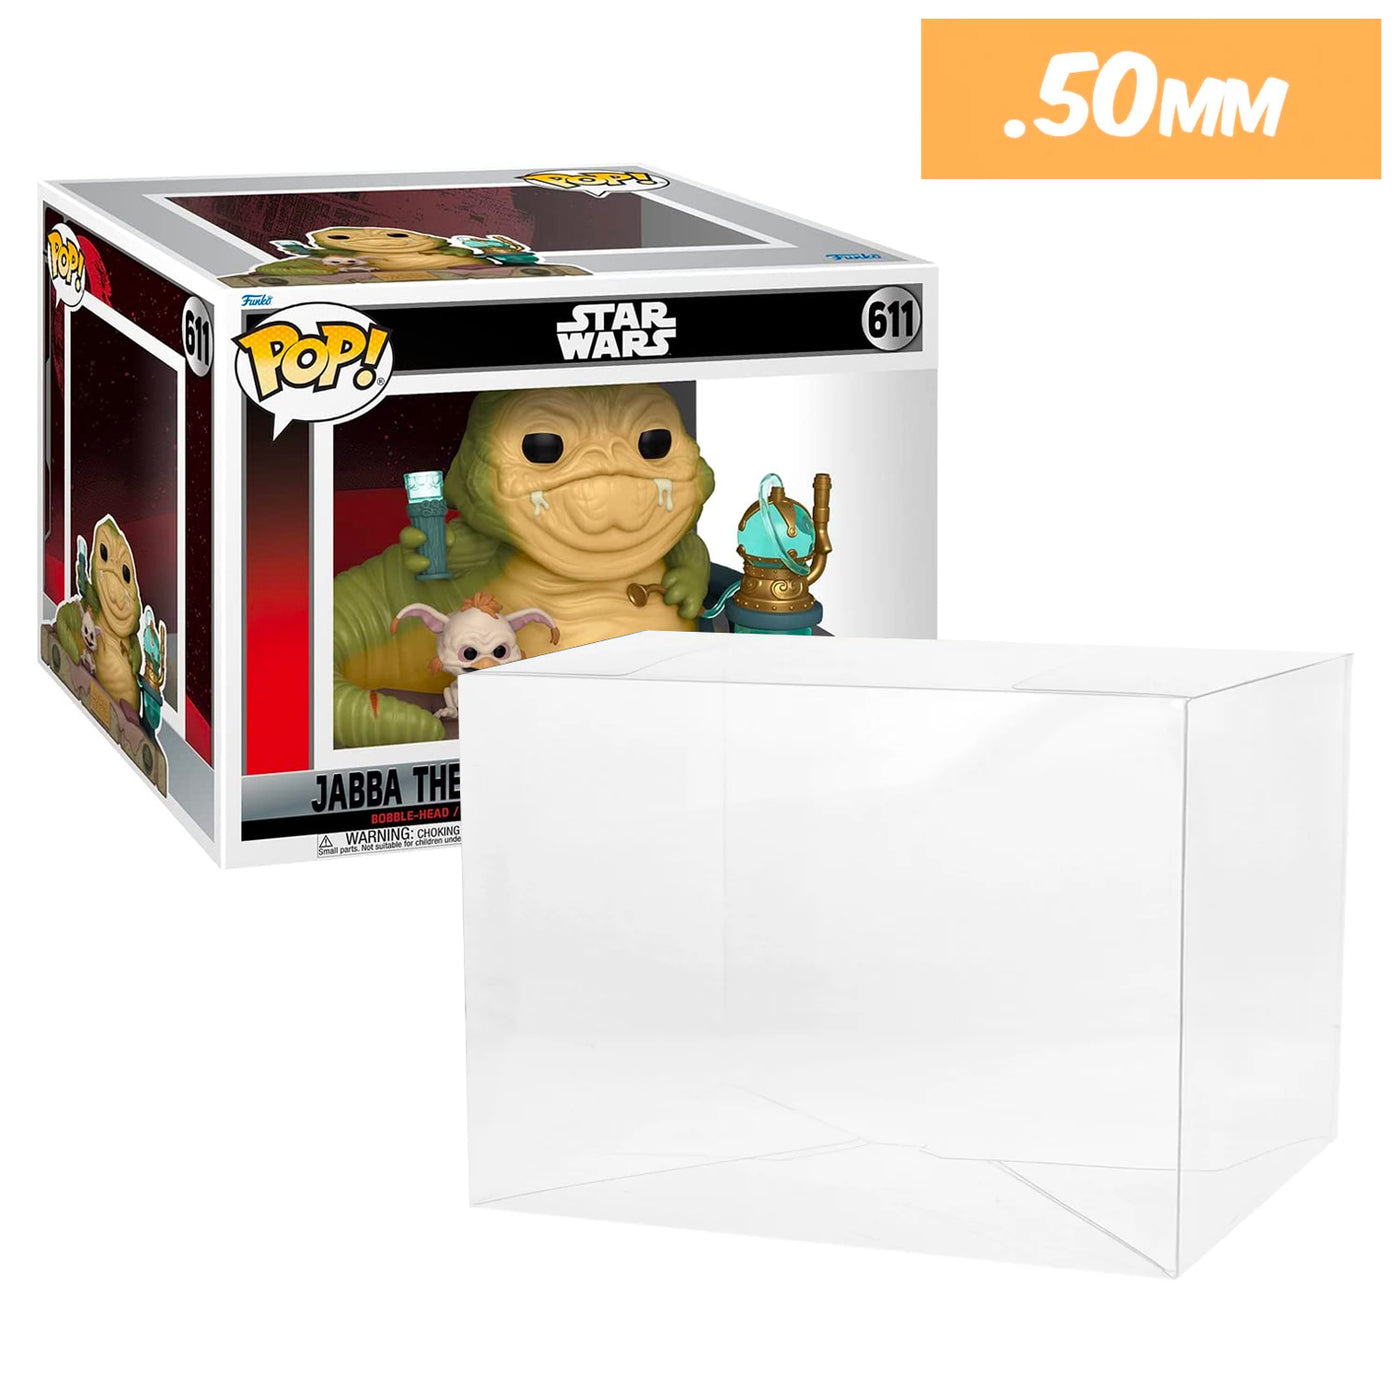 jabba the hutt salacious b crumb 611 pop movie moments best funko pop protectors thick strong uv scratch flat top stack vinyl display geek plastic shield vaulted eco armor fits collect protect display case kollector